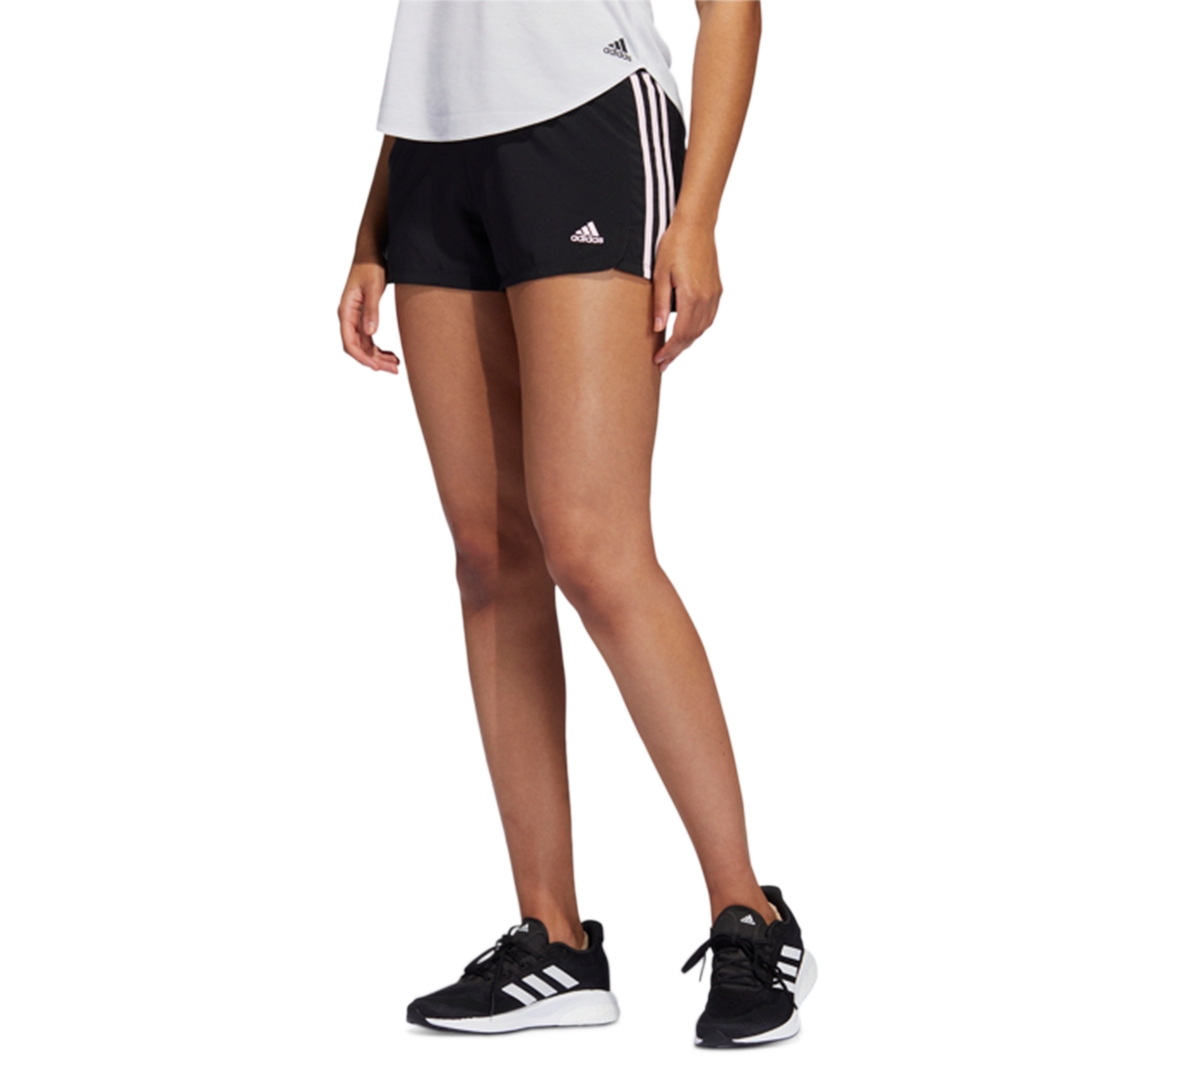 adidas Women's Pacer Woven Training Shorts